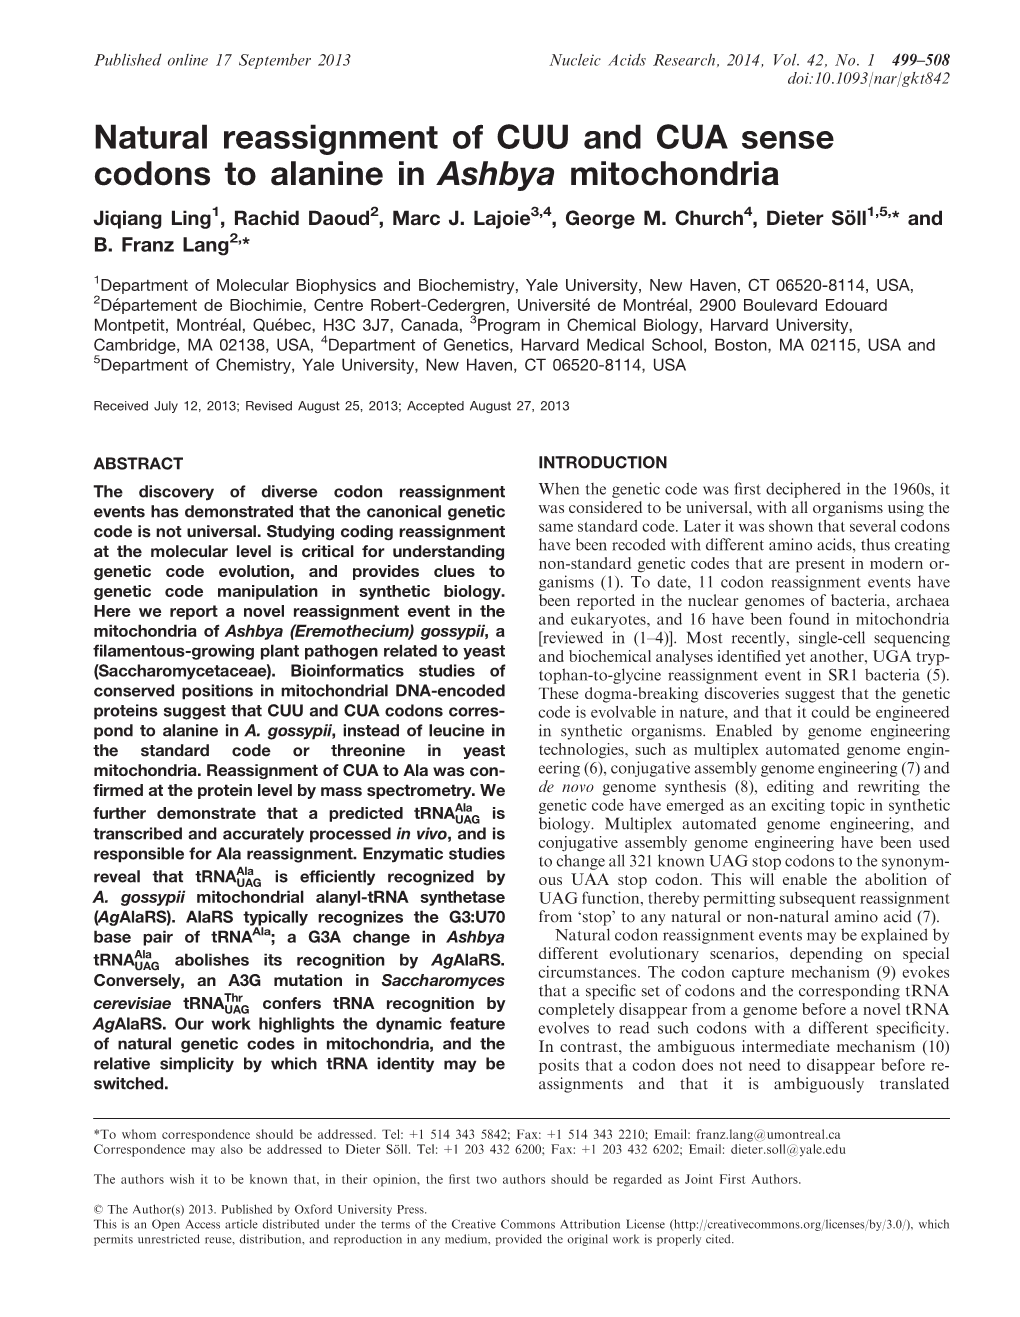 Natural Reassignment of CUU and CUA Sense Codons to Alanine in Ashbya Mitochondria Jiqiang Ling1, Rachid Daoud2, Marc J